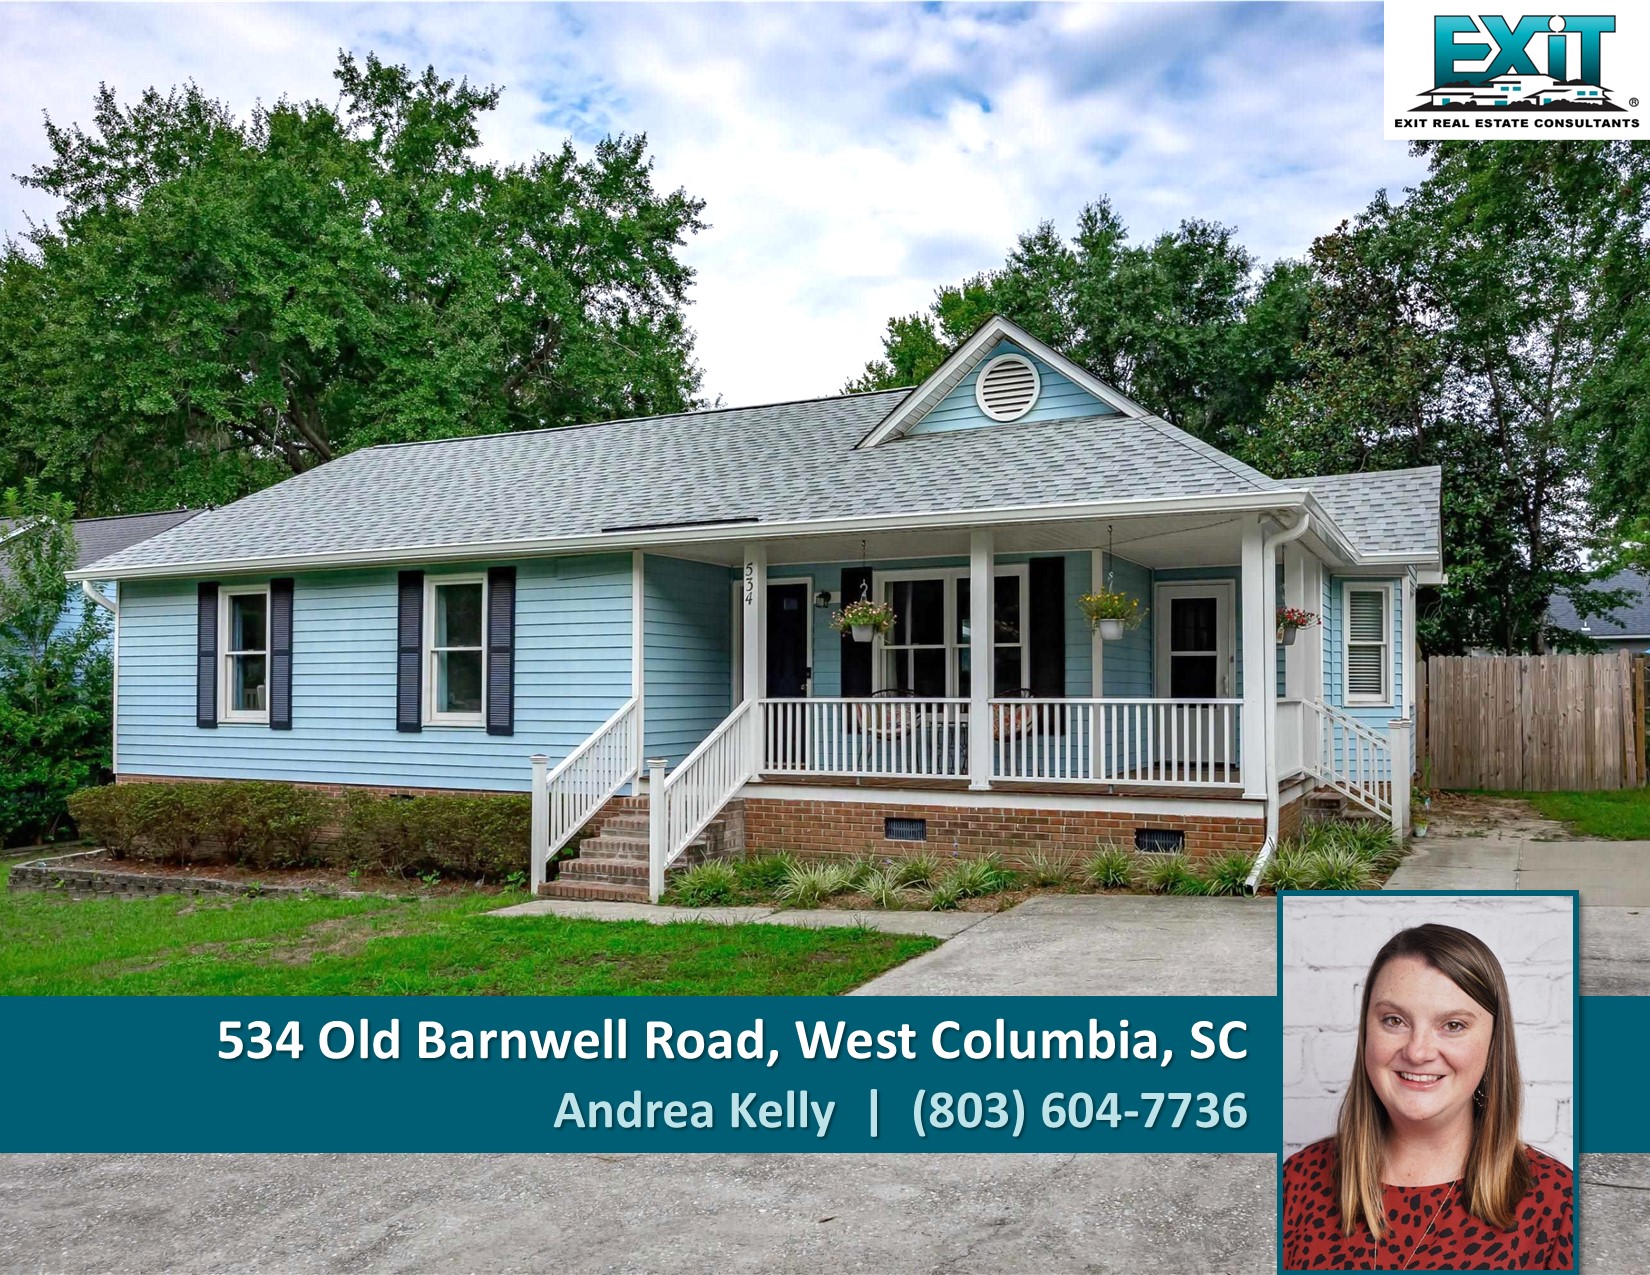 Just listed in Savanna Woods - West Columbia